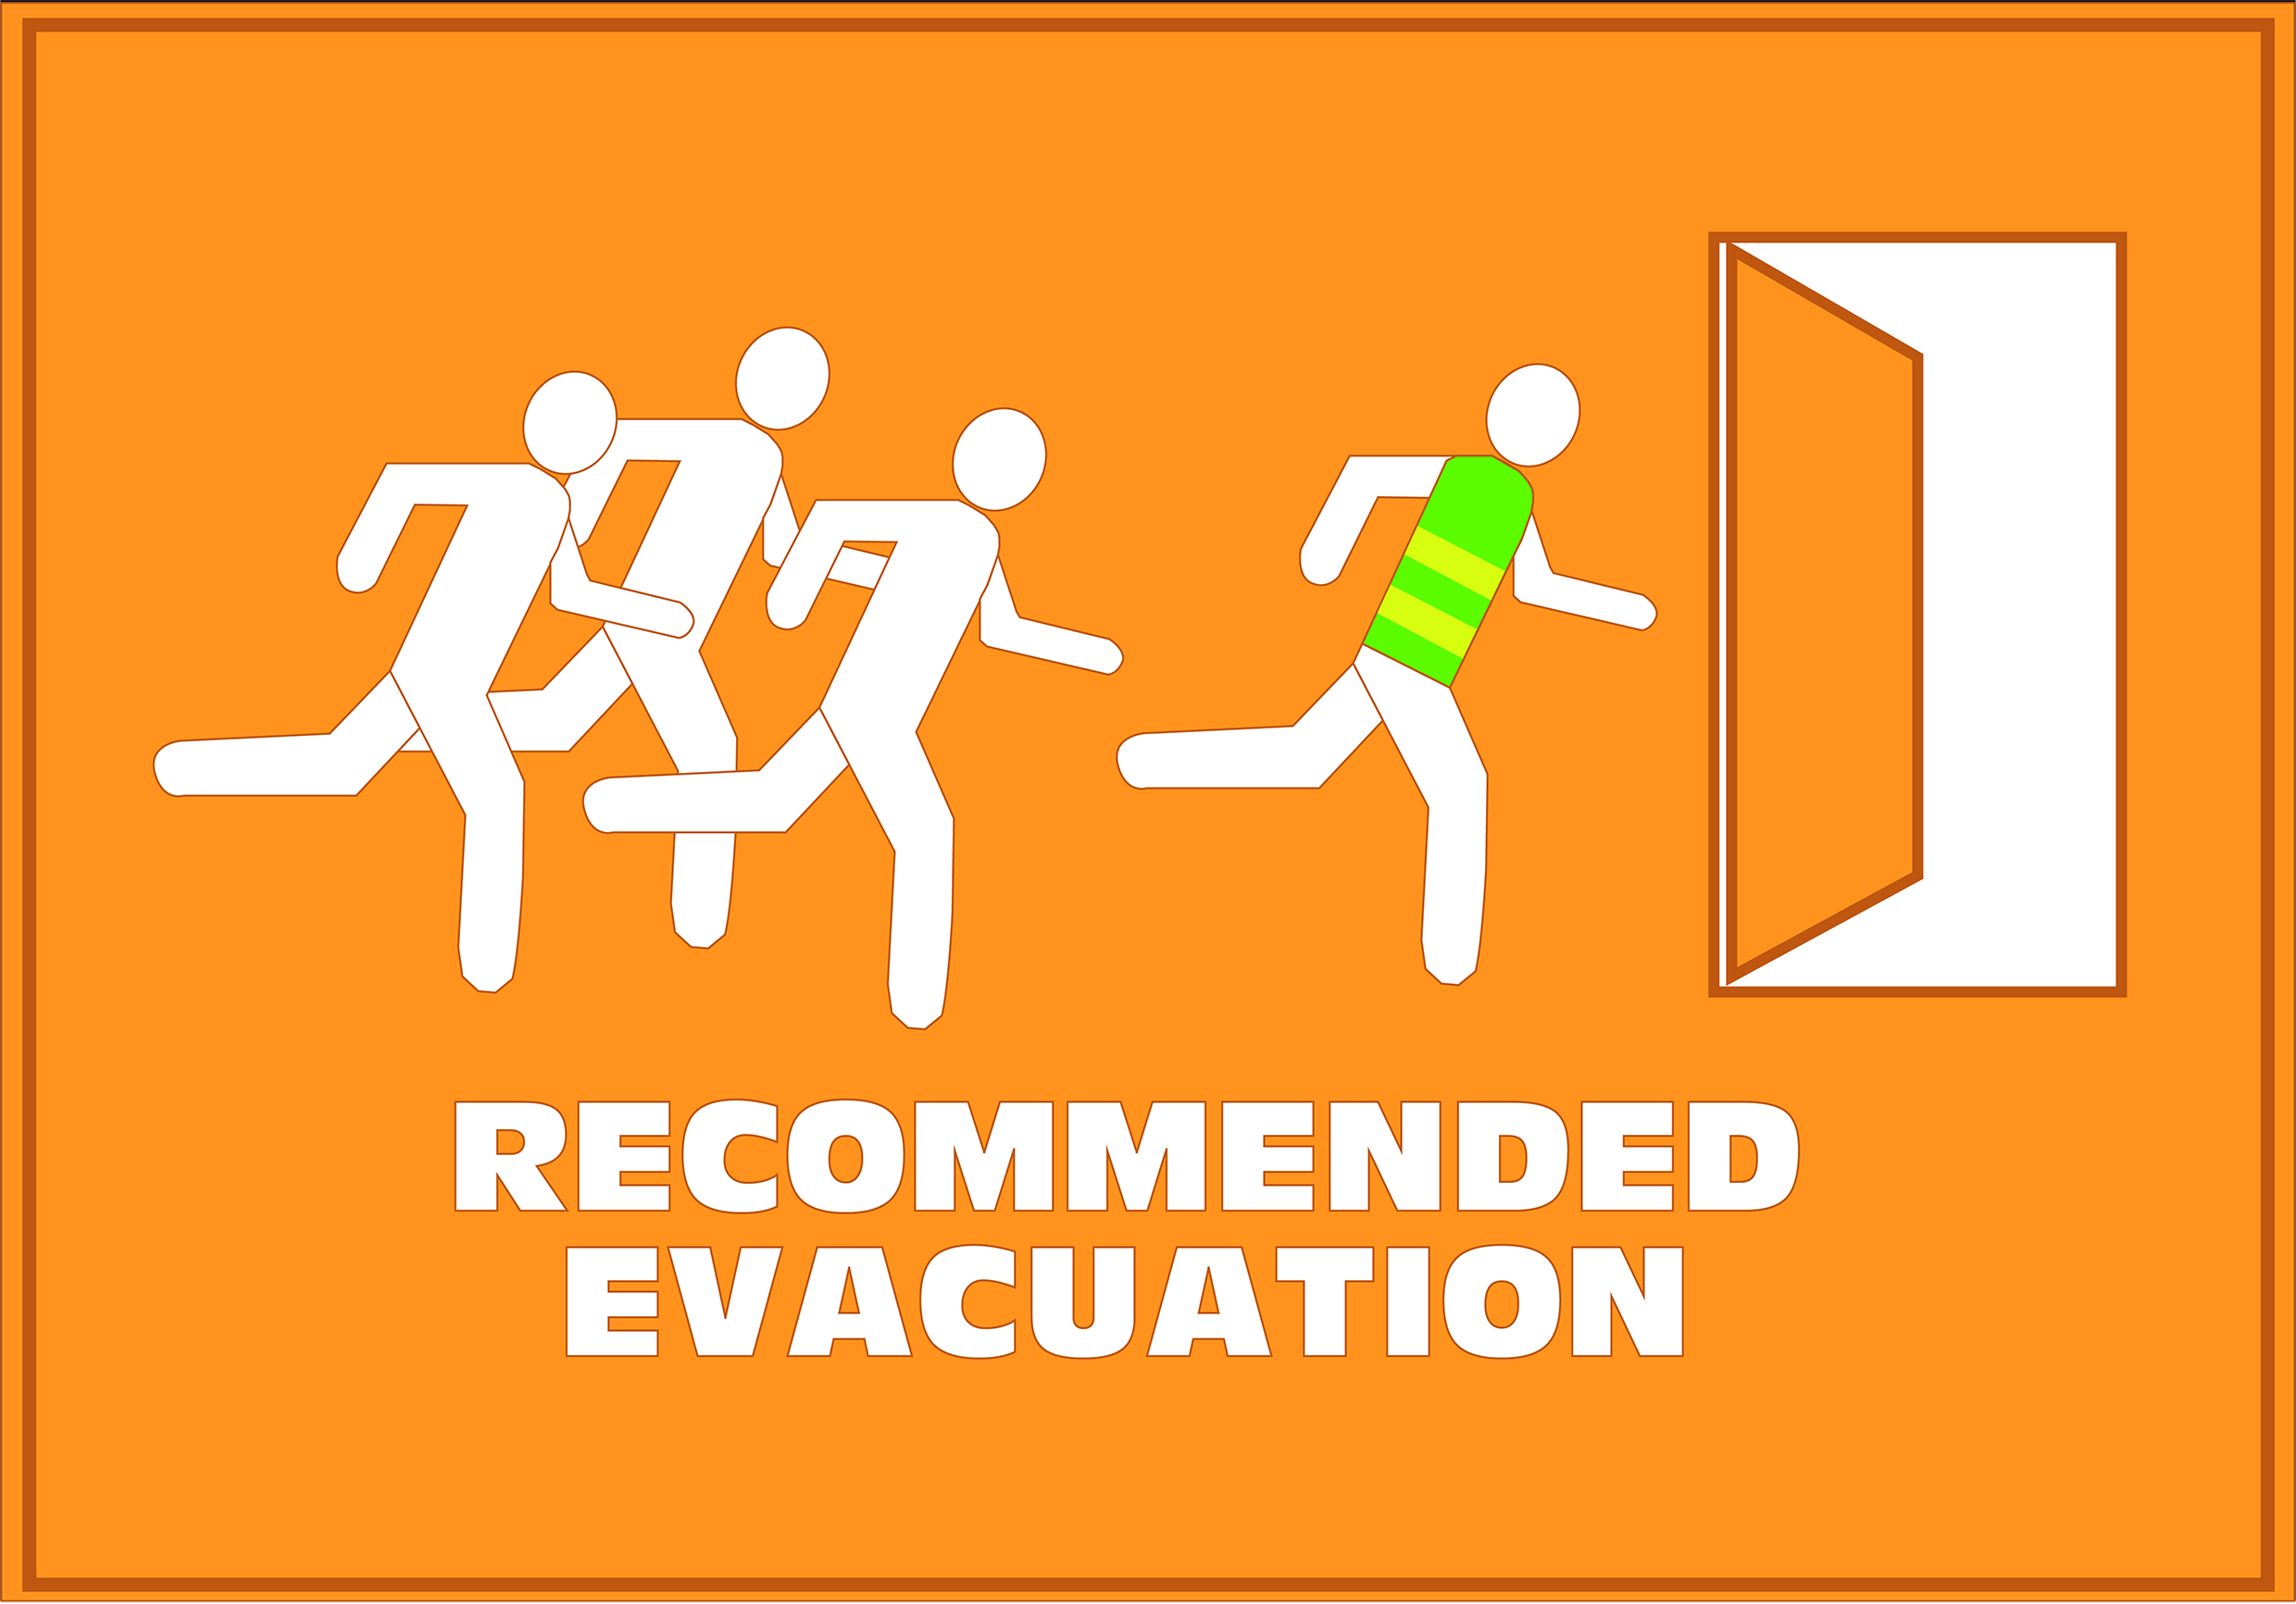 Figure 4.4.1.2 Recommended Evacuation